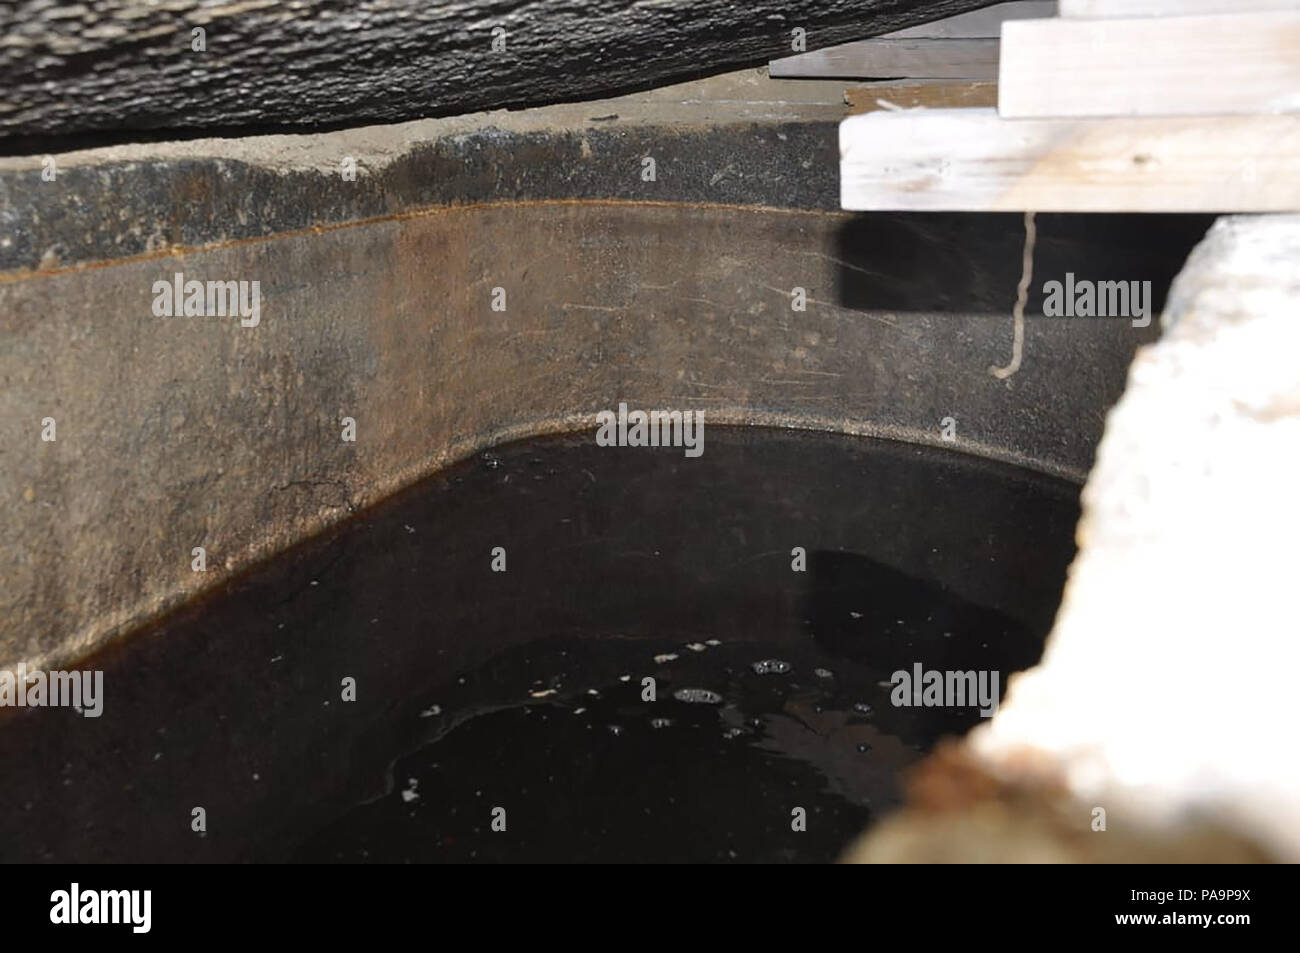 19 July 2018 - Alexandria, Egypt - The black granite sarcophagus uncovered in early July in Alexandria's Sidi Gaber district during foundation work on an apartment building, was opened today by a scientific archaeological committee and they discovered that three skeletons were discovered inside amidst sewage water that had seeped inside.  (MOA pool photo) Stock Photo